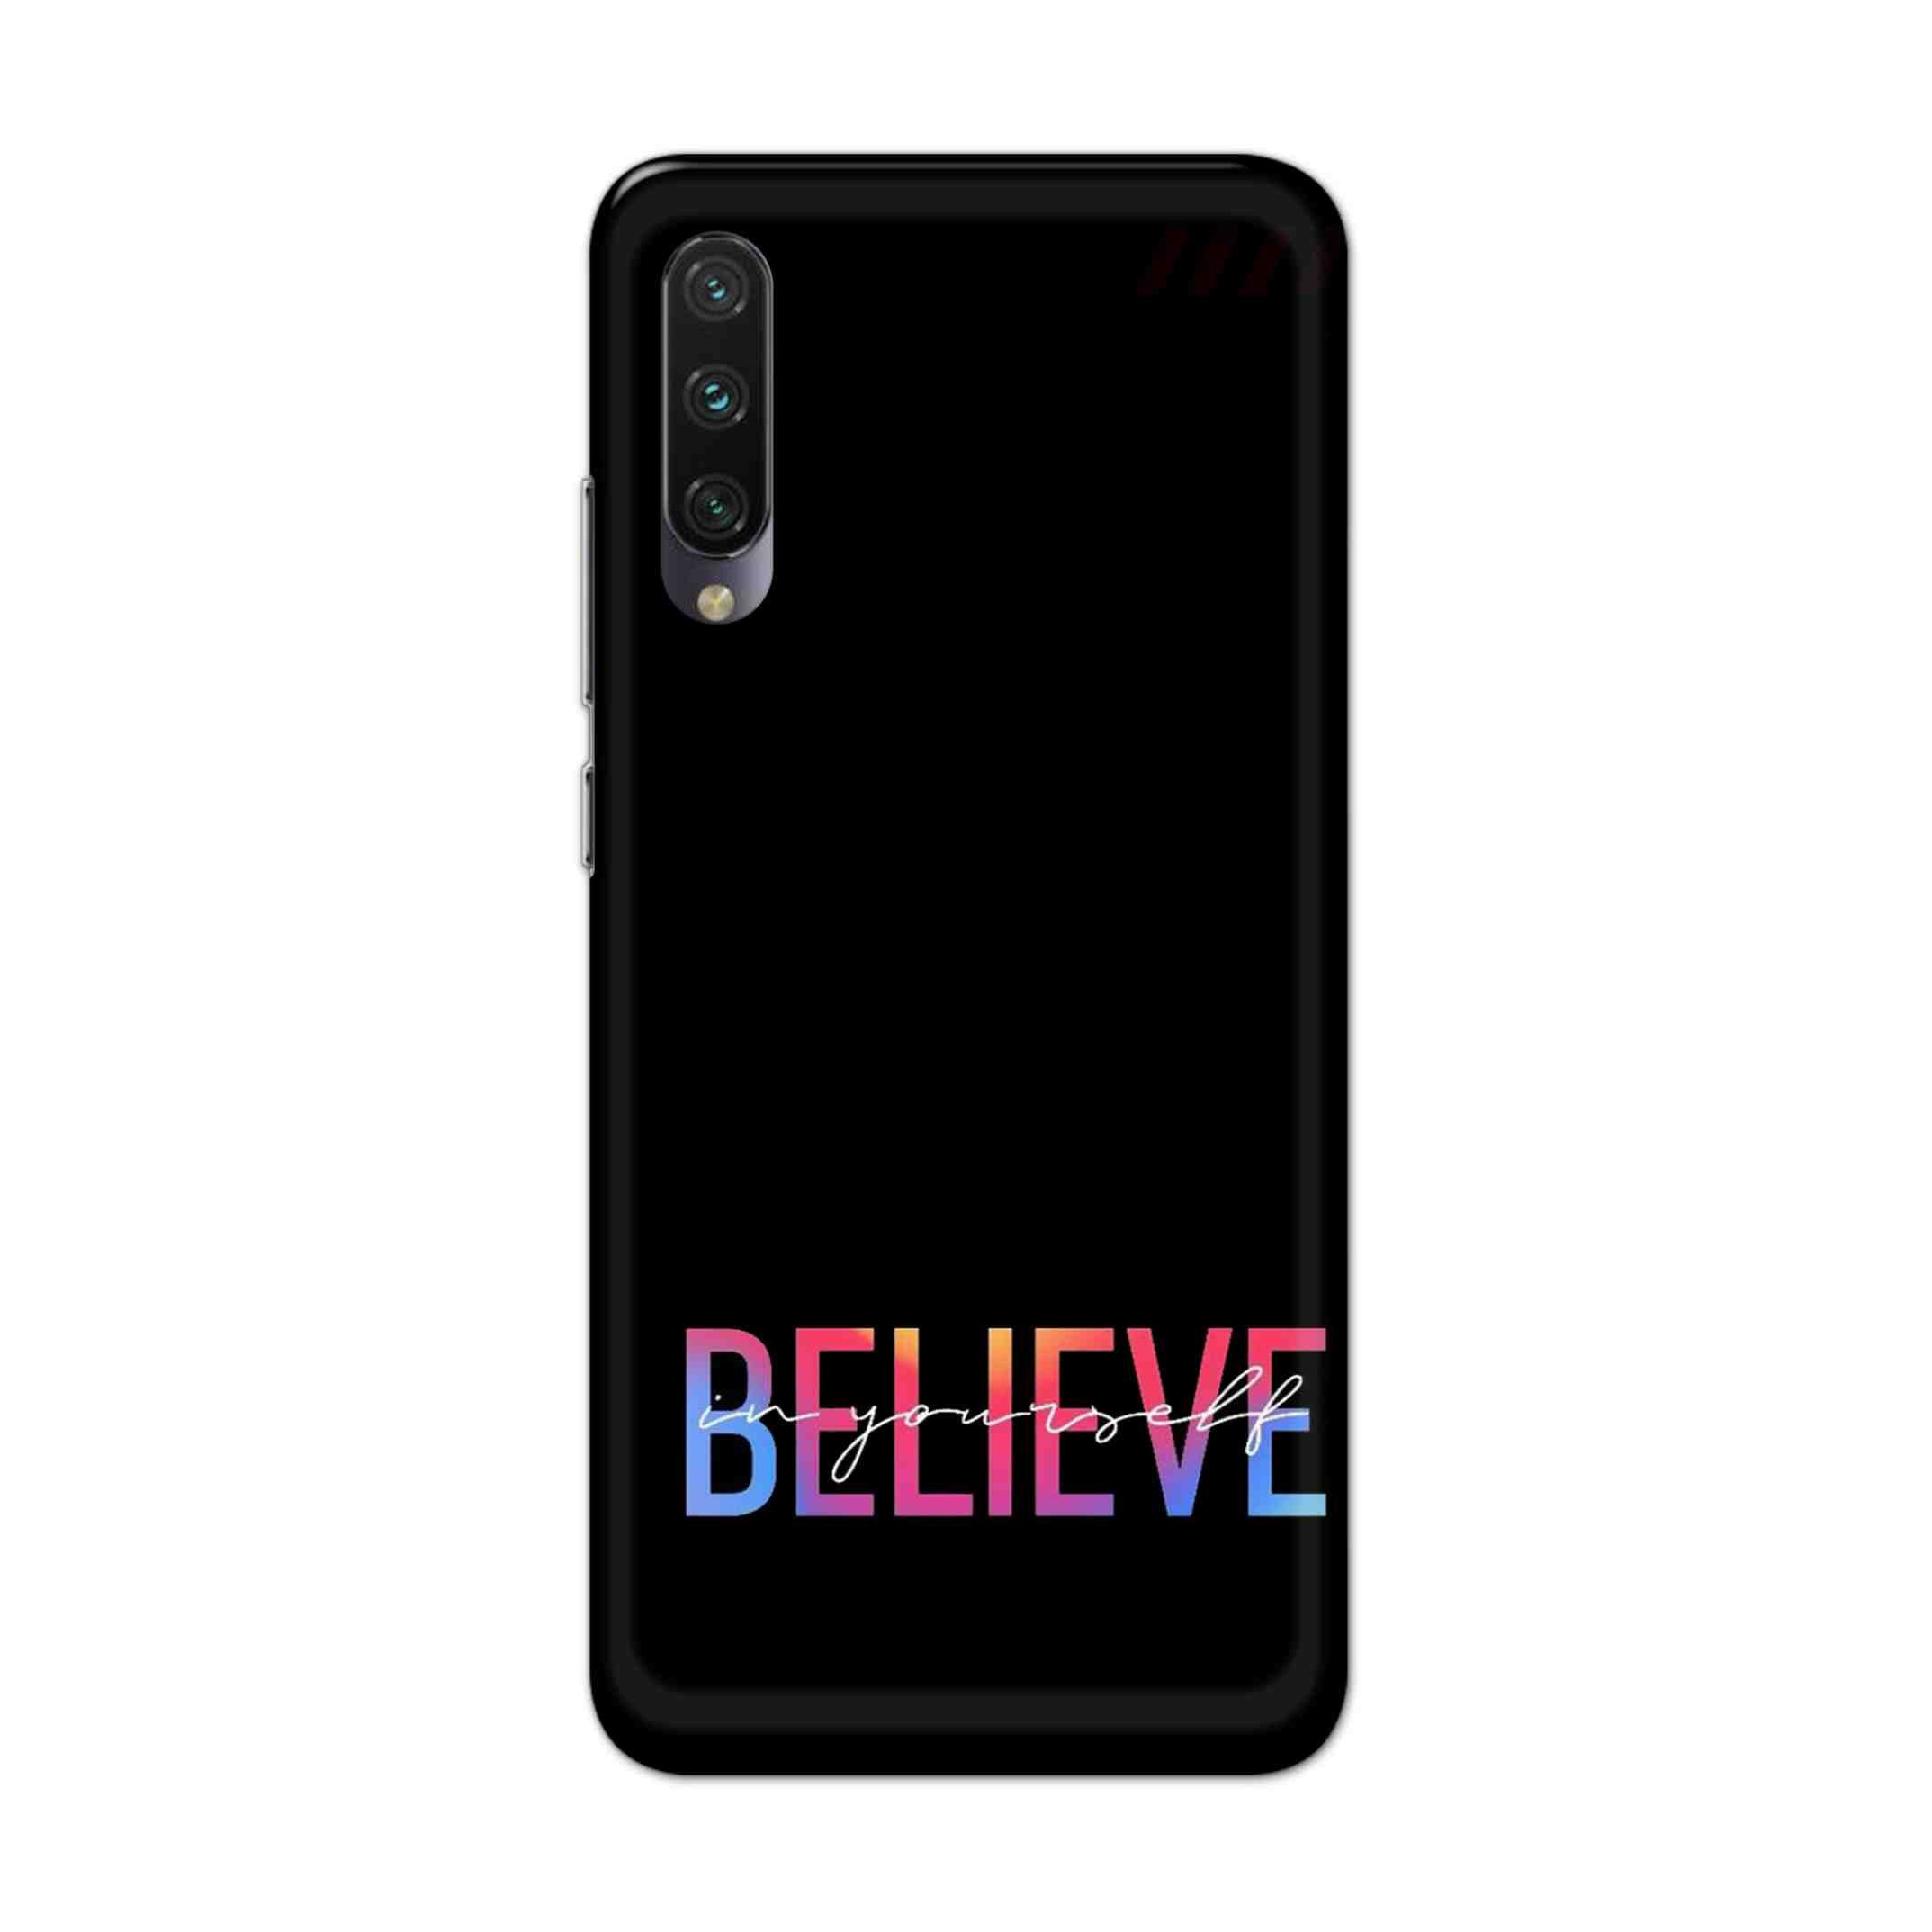 Buy Believe Hard Back Mobile Phone Case Cover For Xiaomi Mi A3 Online